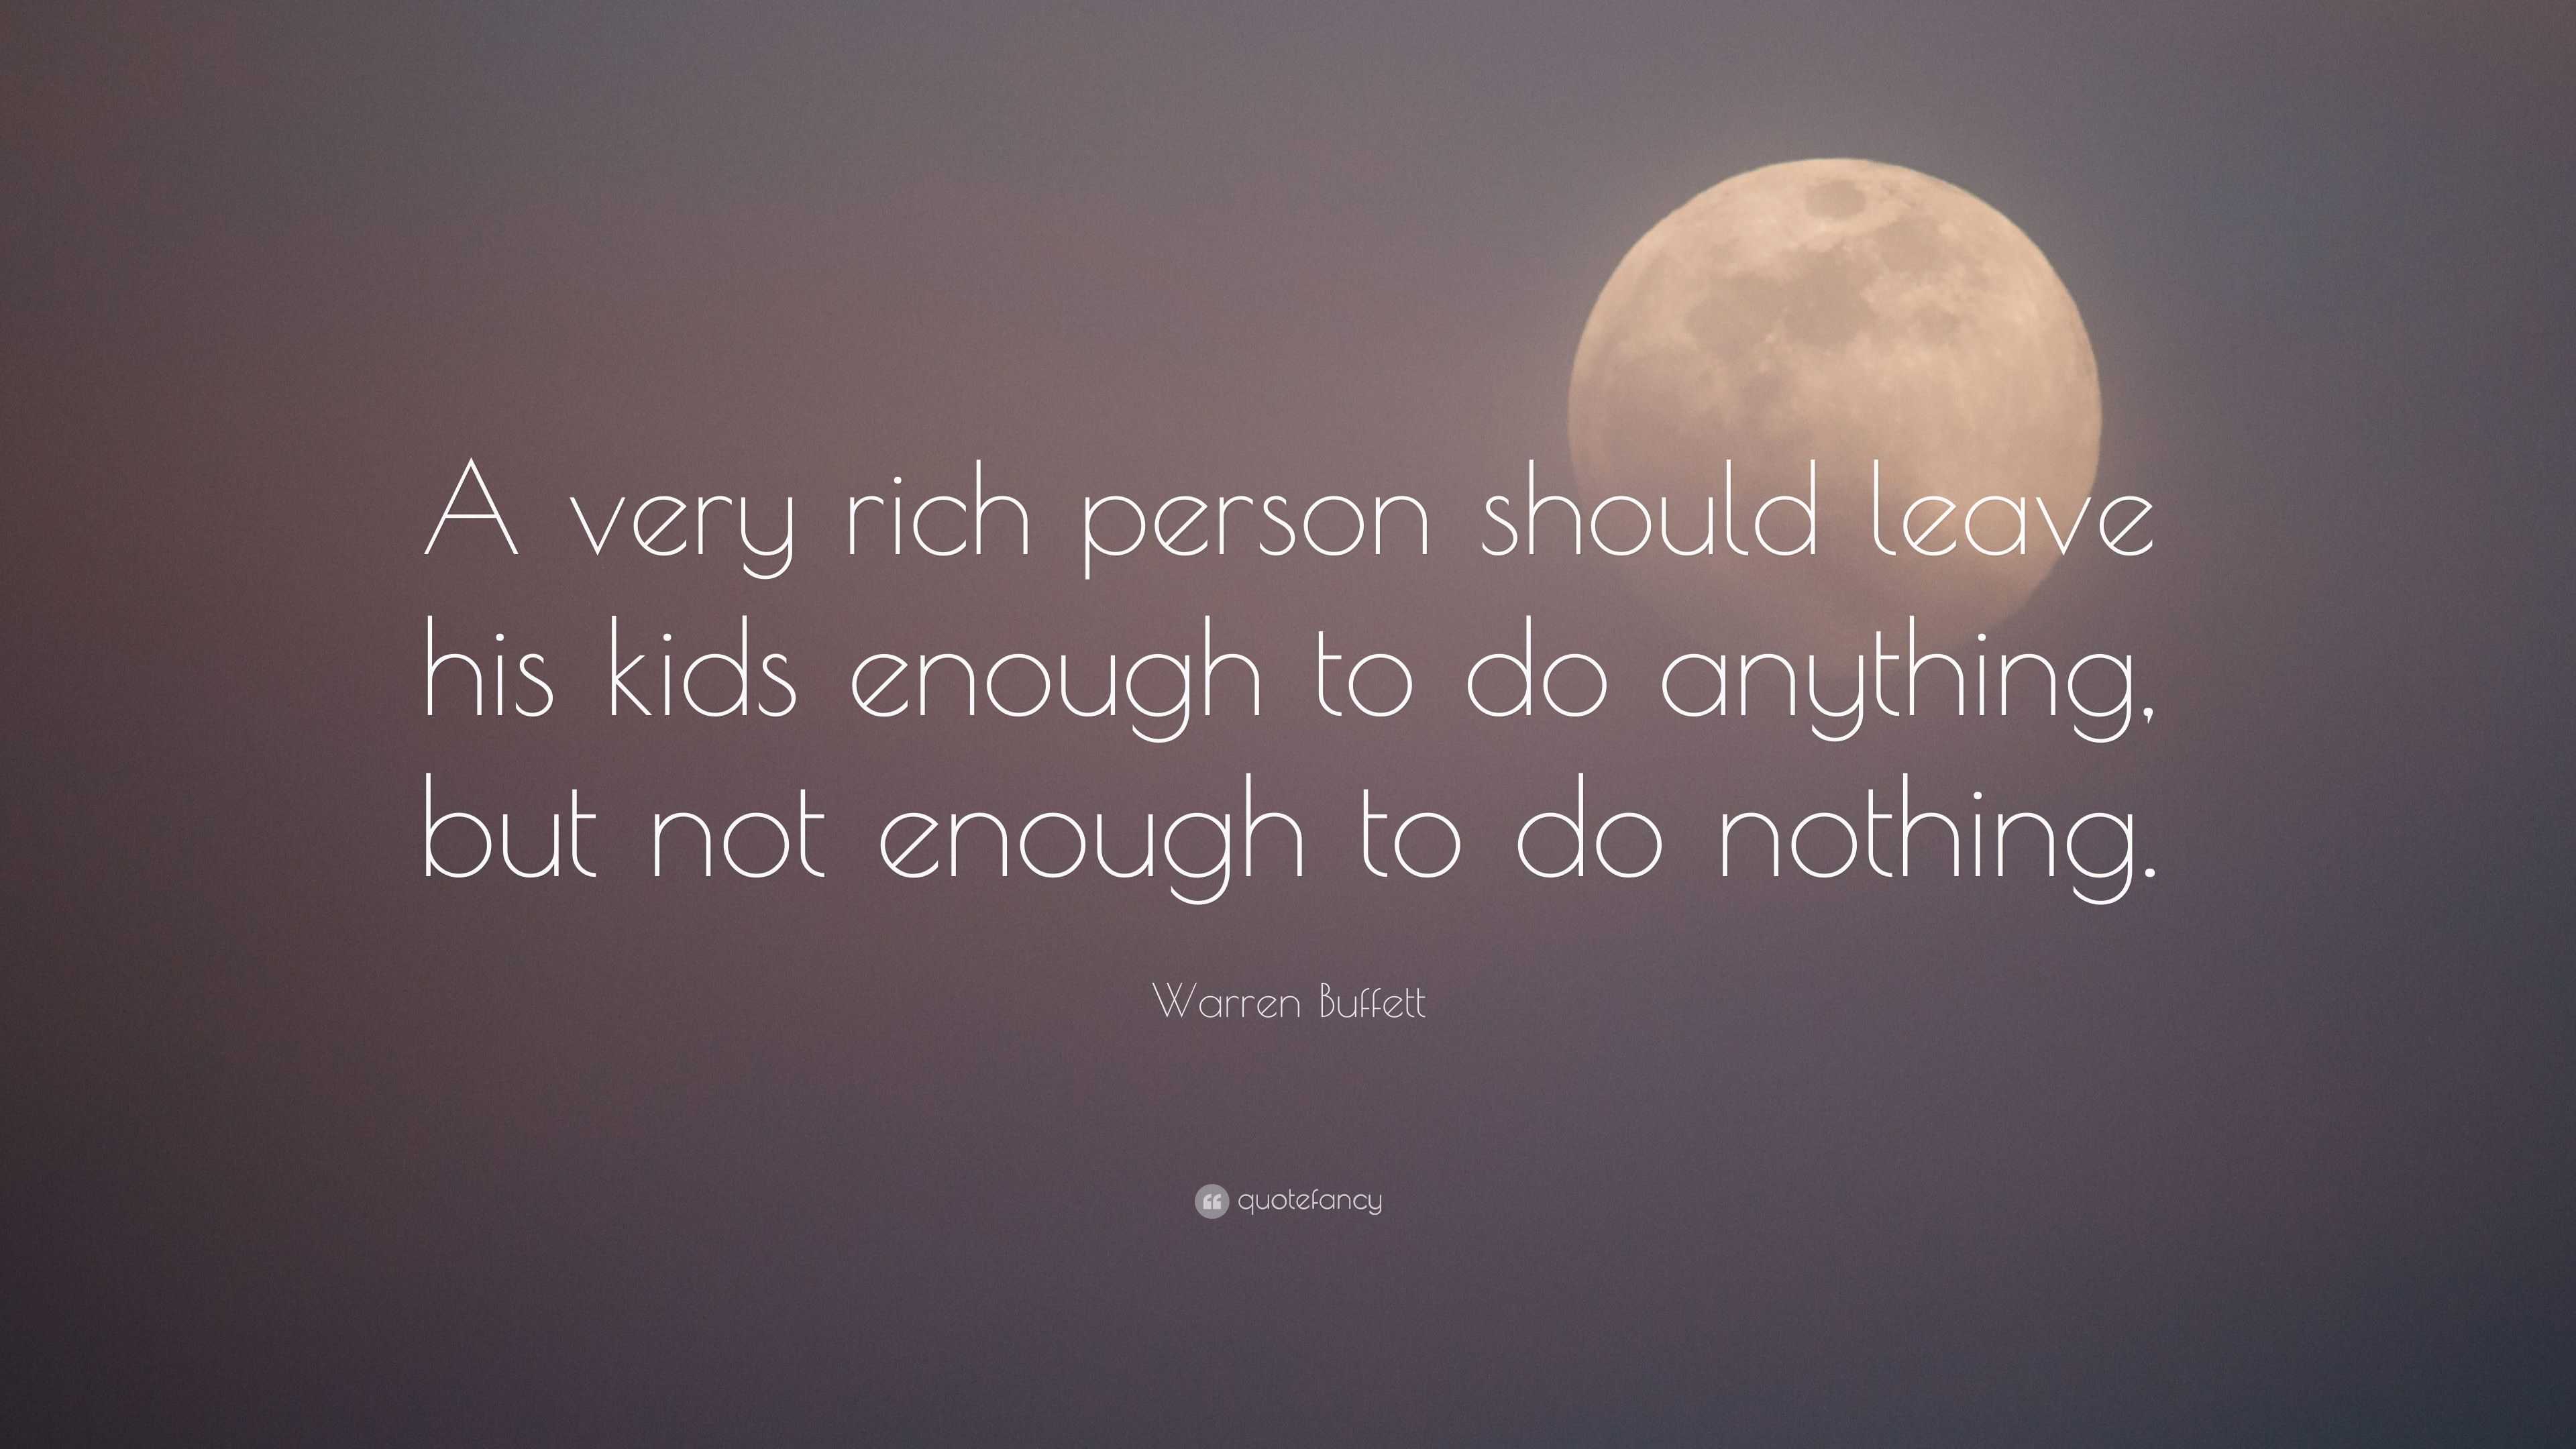 Warren Buffett Quote: “A very rich person should leave his kids enough ...